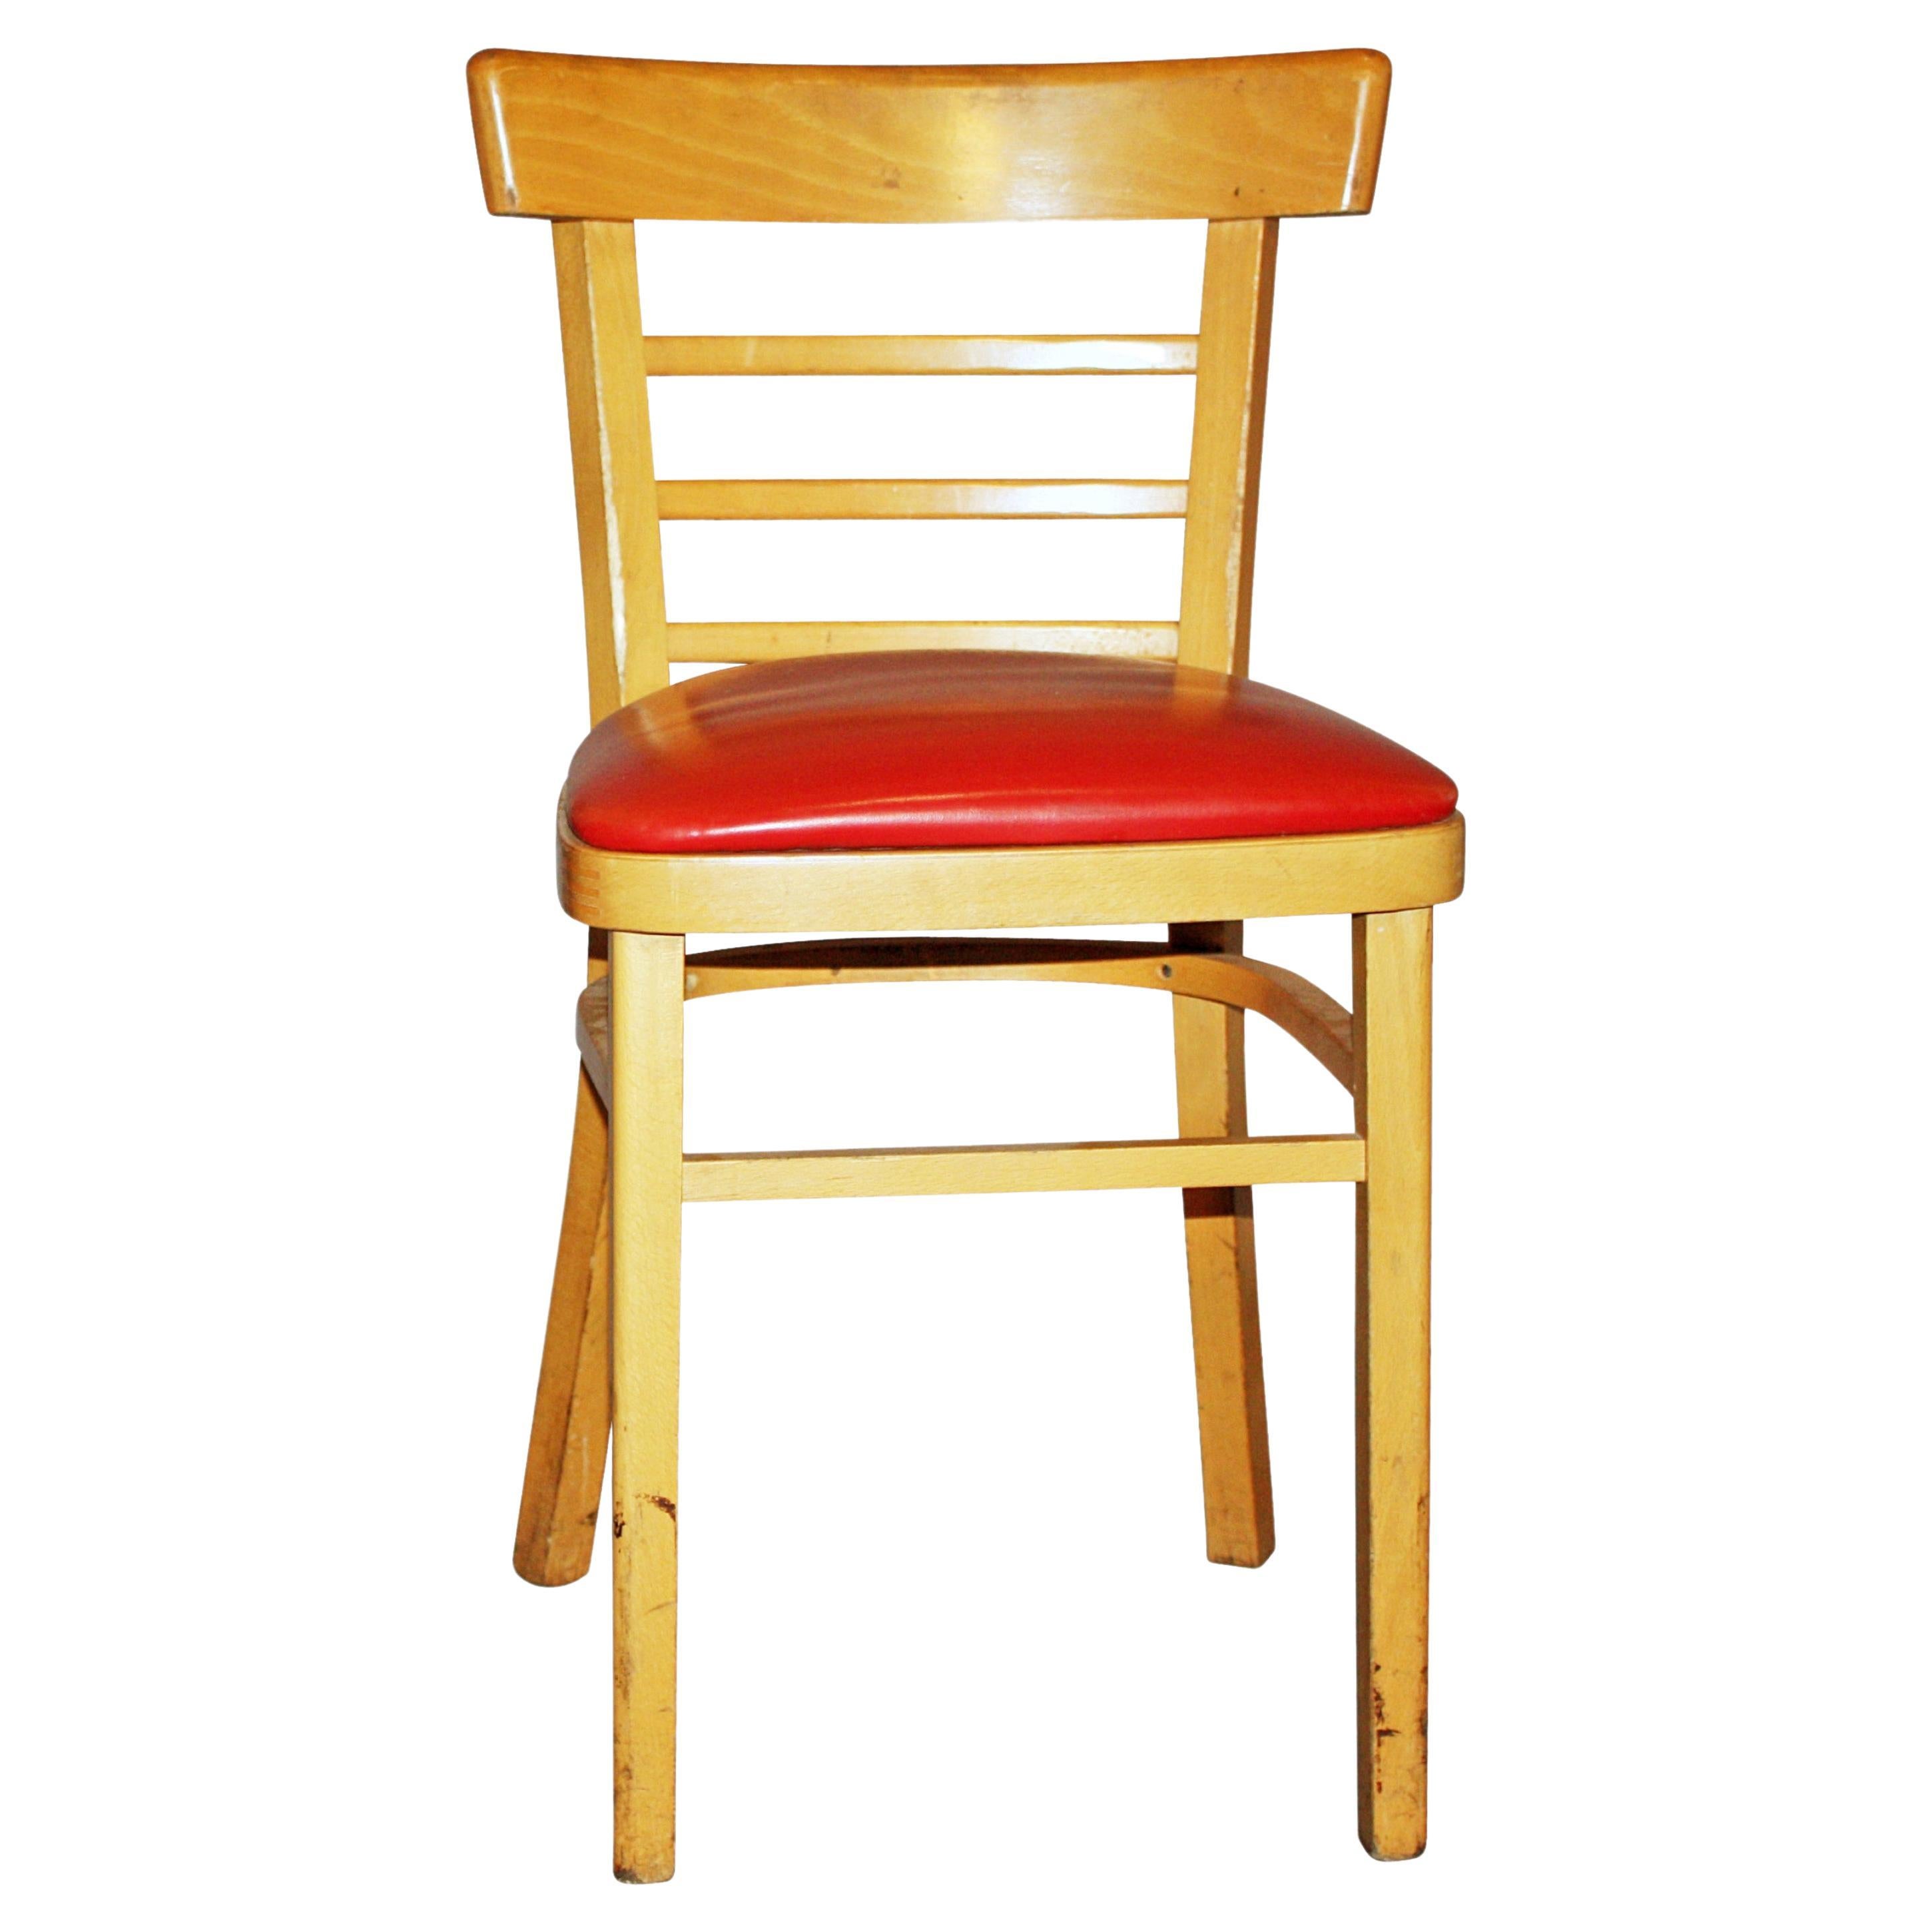 Red Vinyl Maple Bentwood Ladder Back Chair Quantity Available